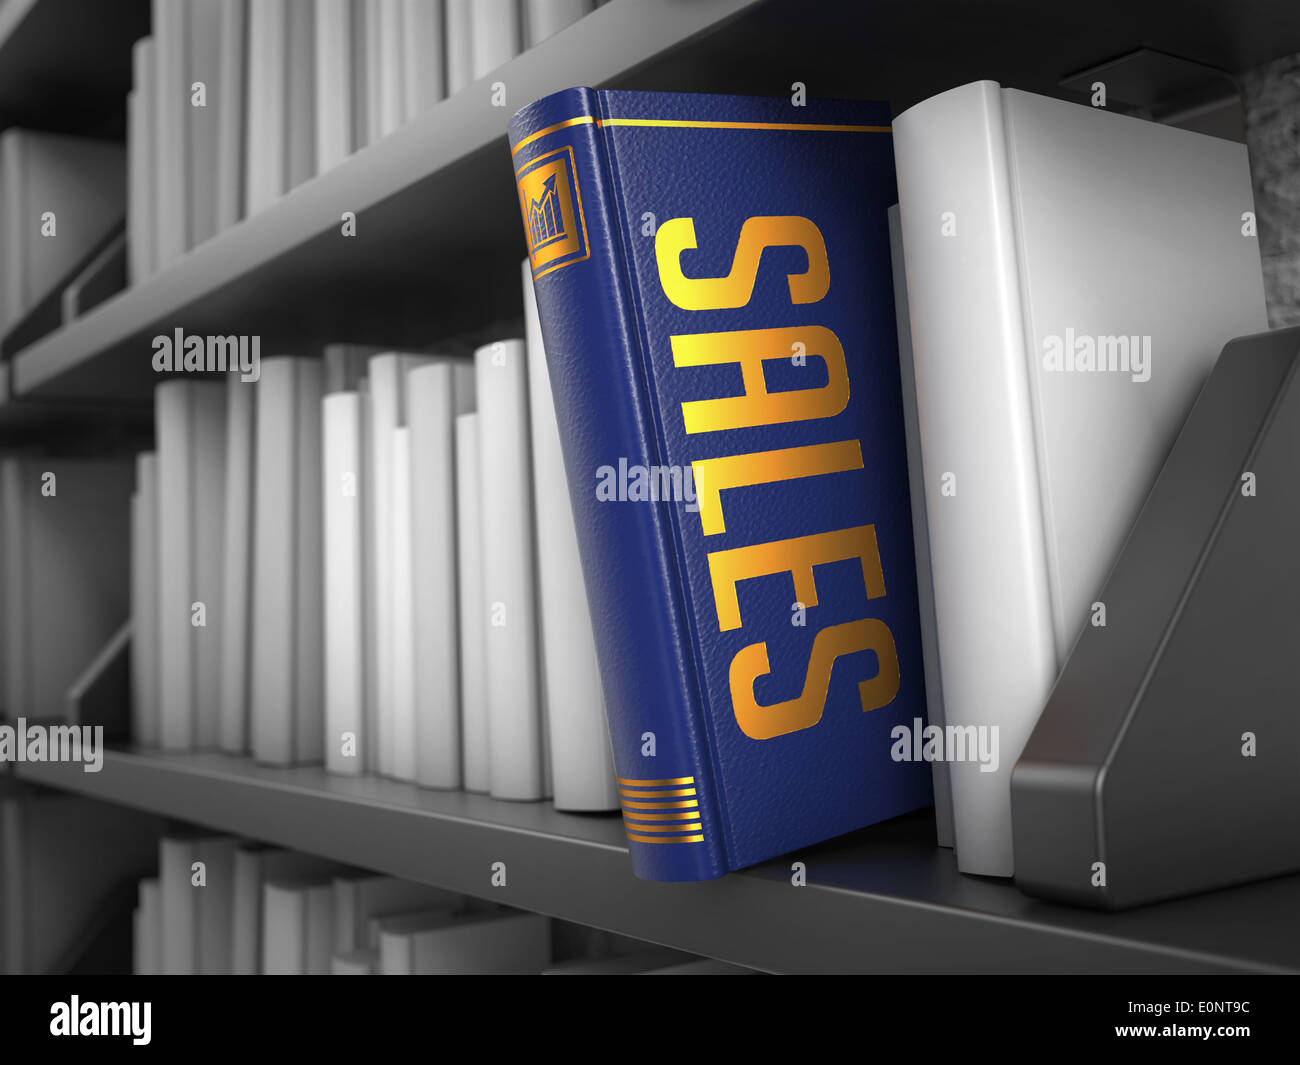 Sales - Title of Book. Internet Concept. Stock Photo